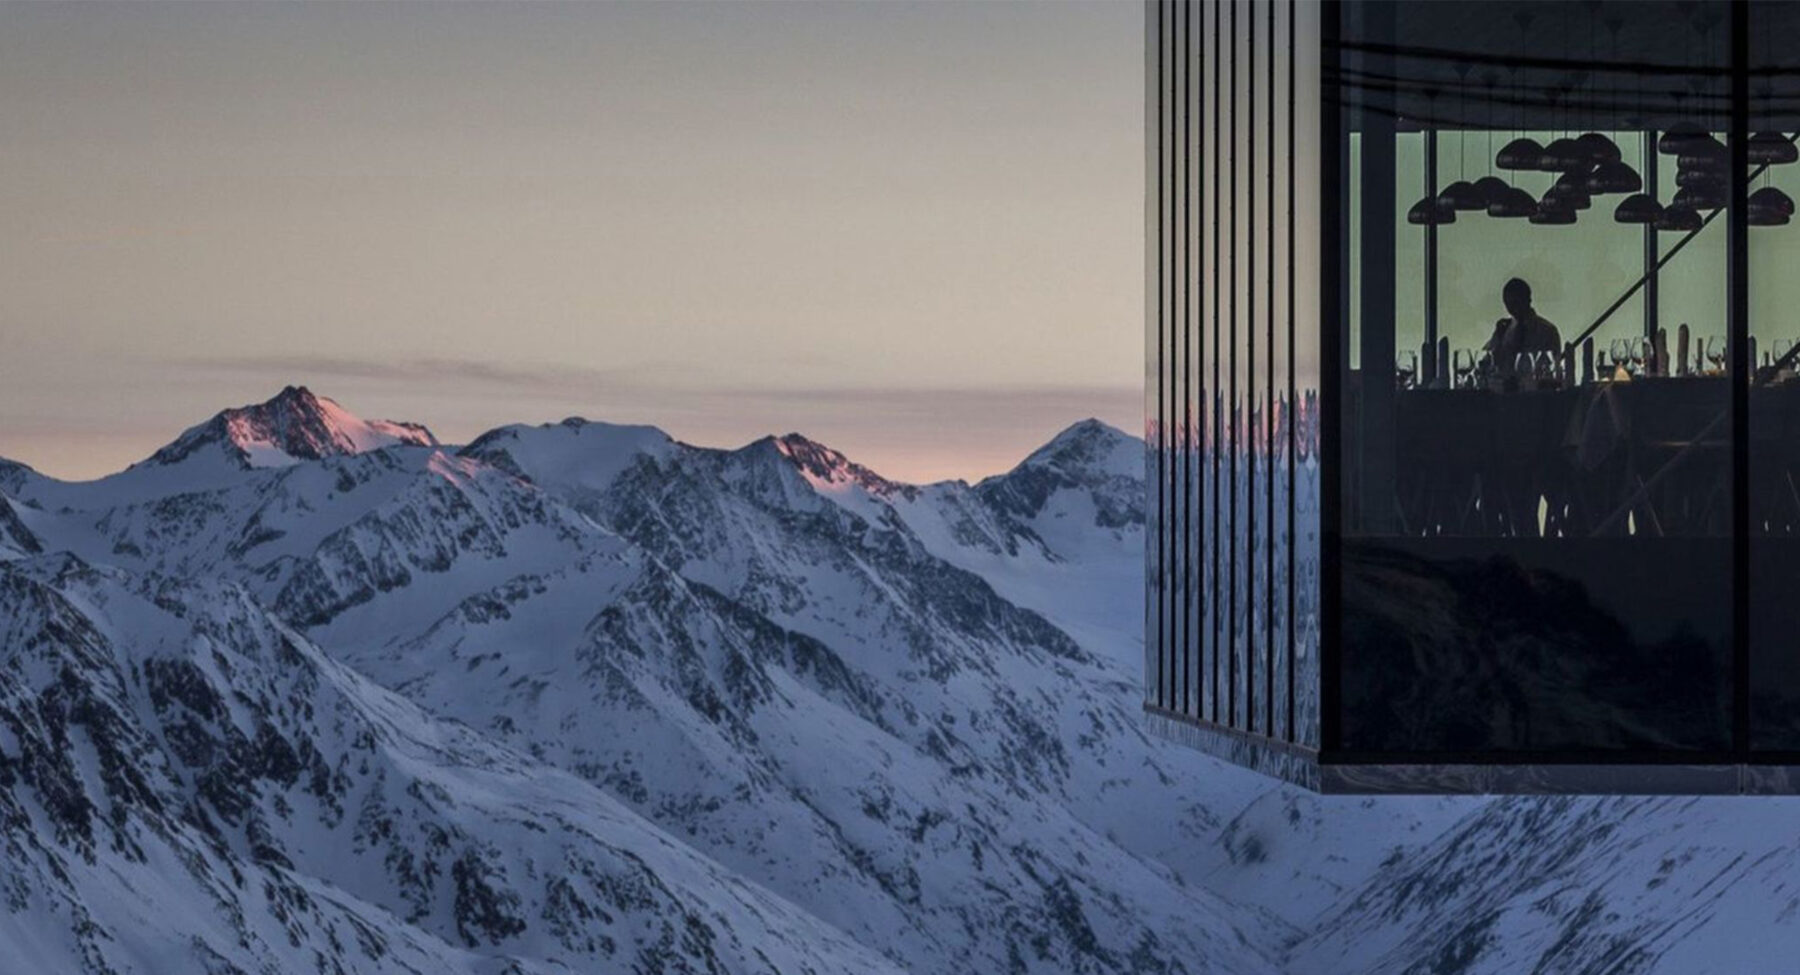 Glass-walled restaurant overlooking a sunset over snowy mountains